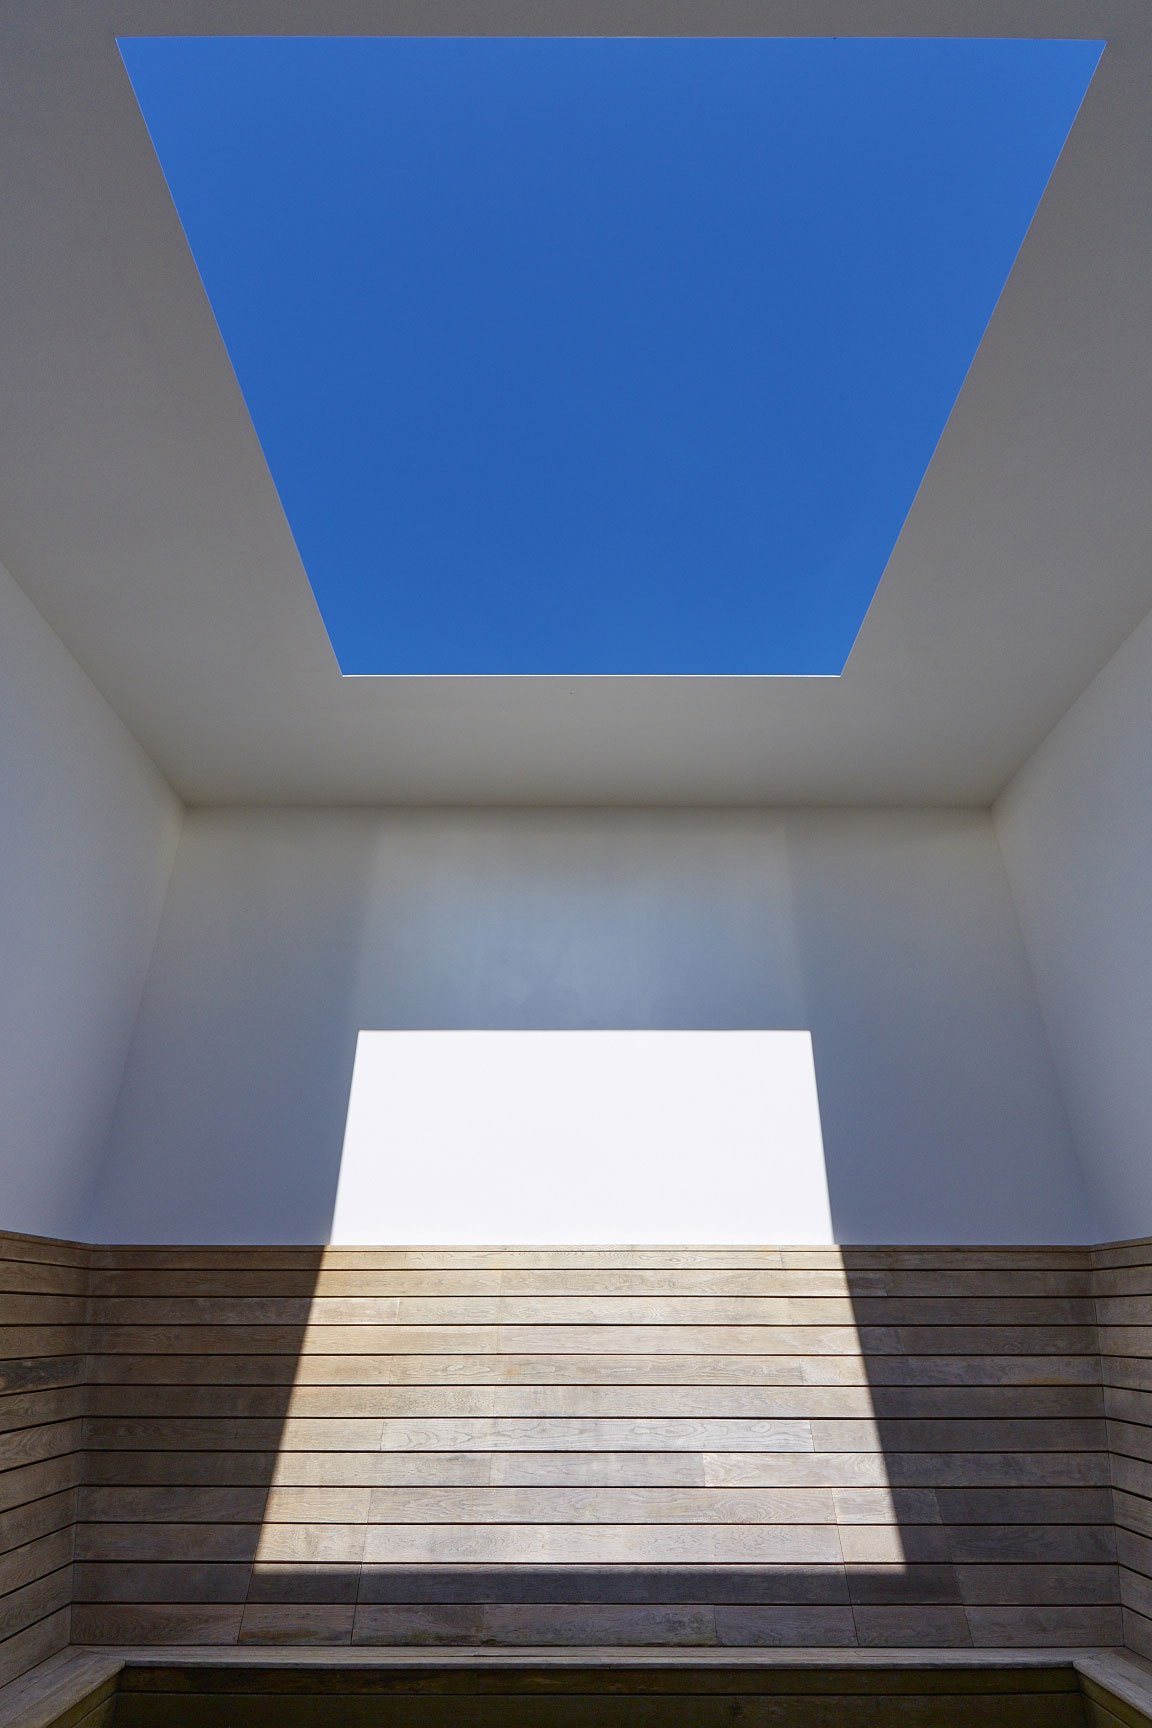 James Turrell’s LightScape installation at Houghton Hall: Seldom Seen, 2002, one of the artist’s Skyspaces. Photograph: Peter Huggins.